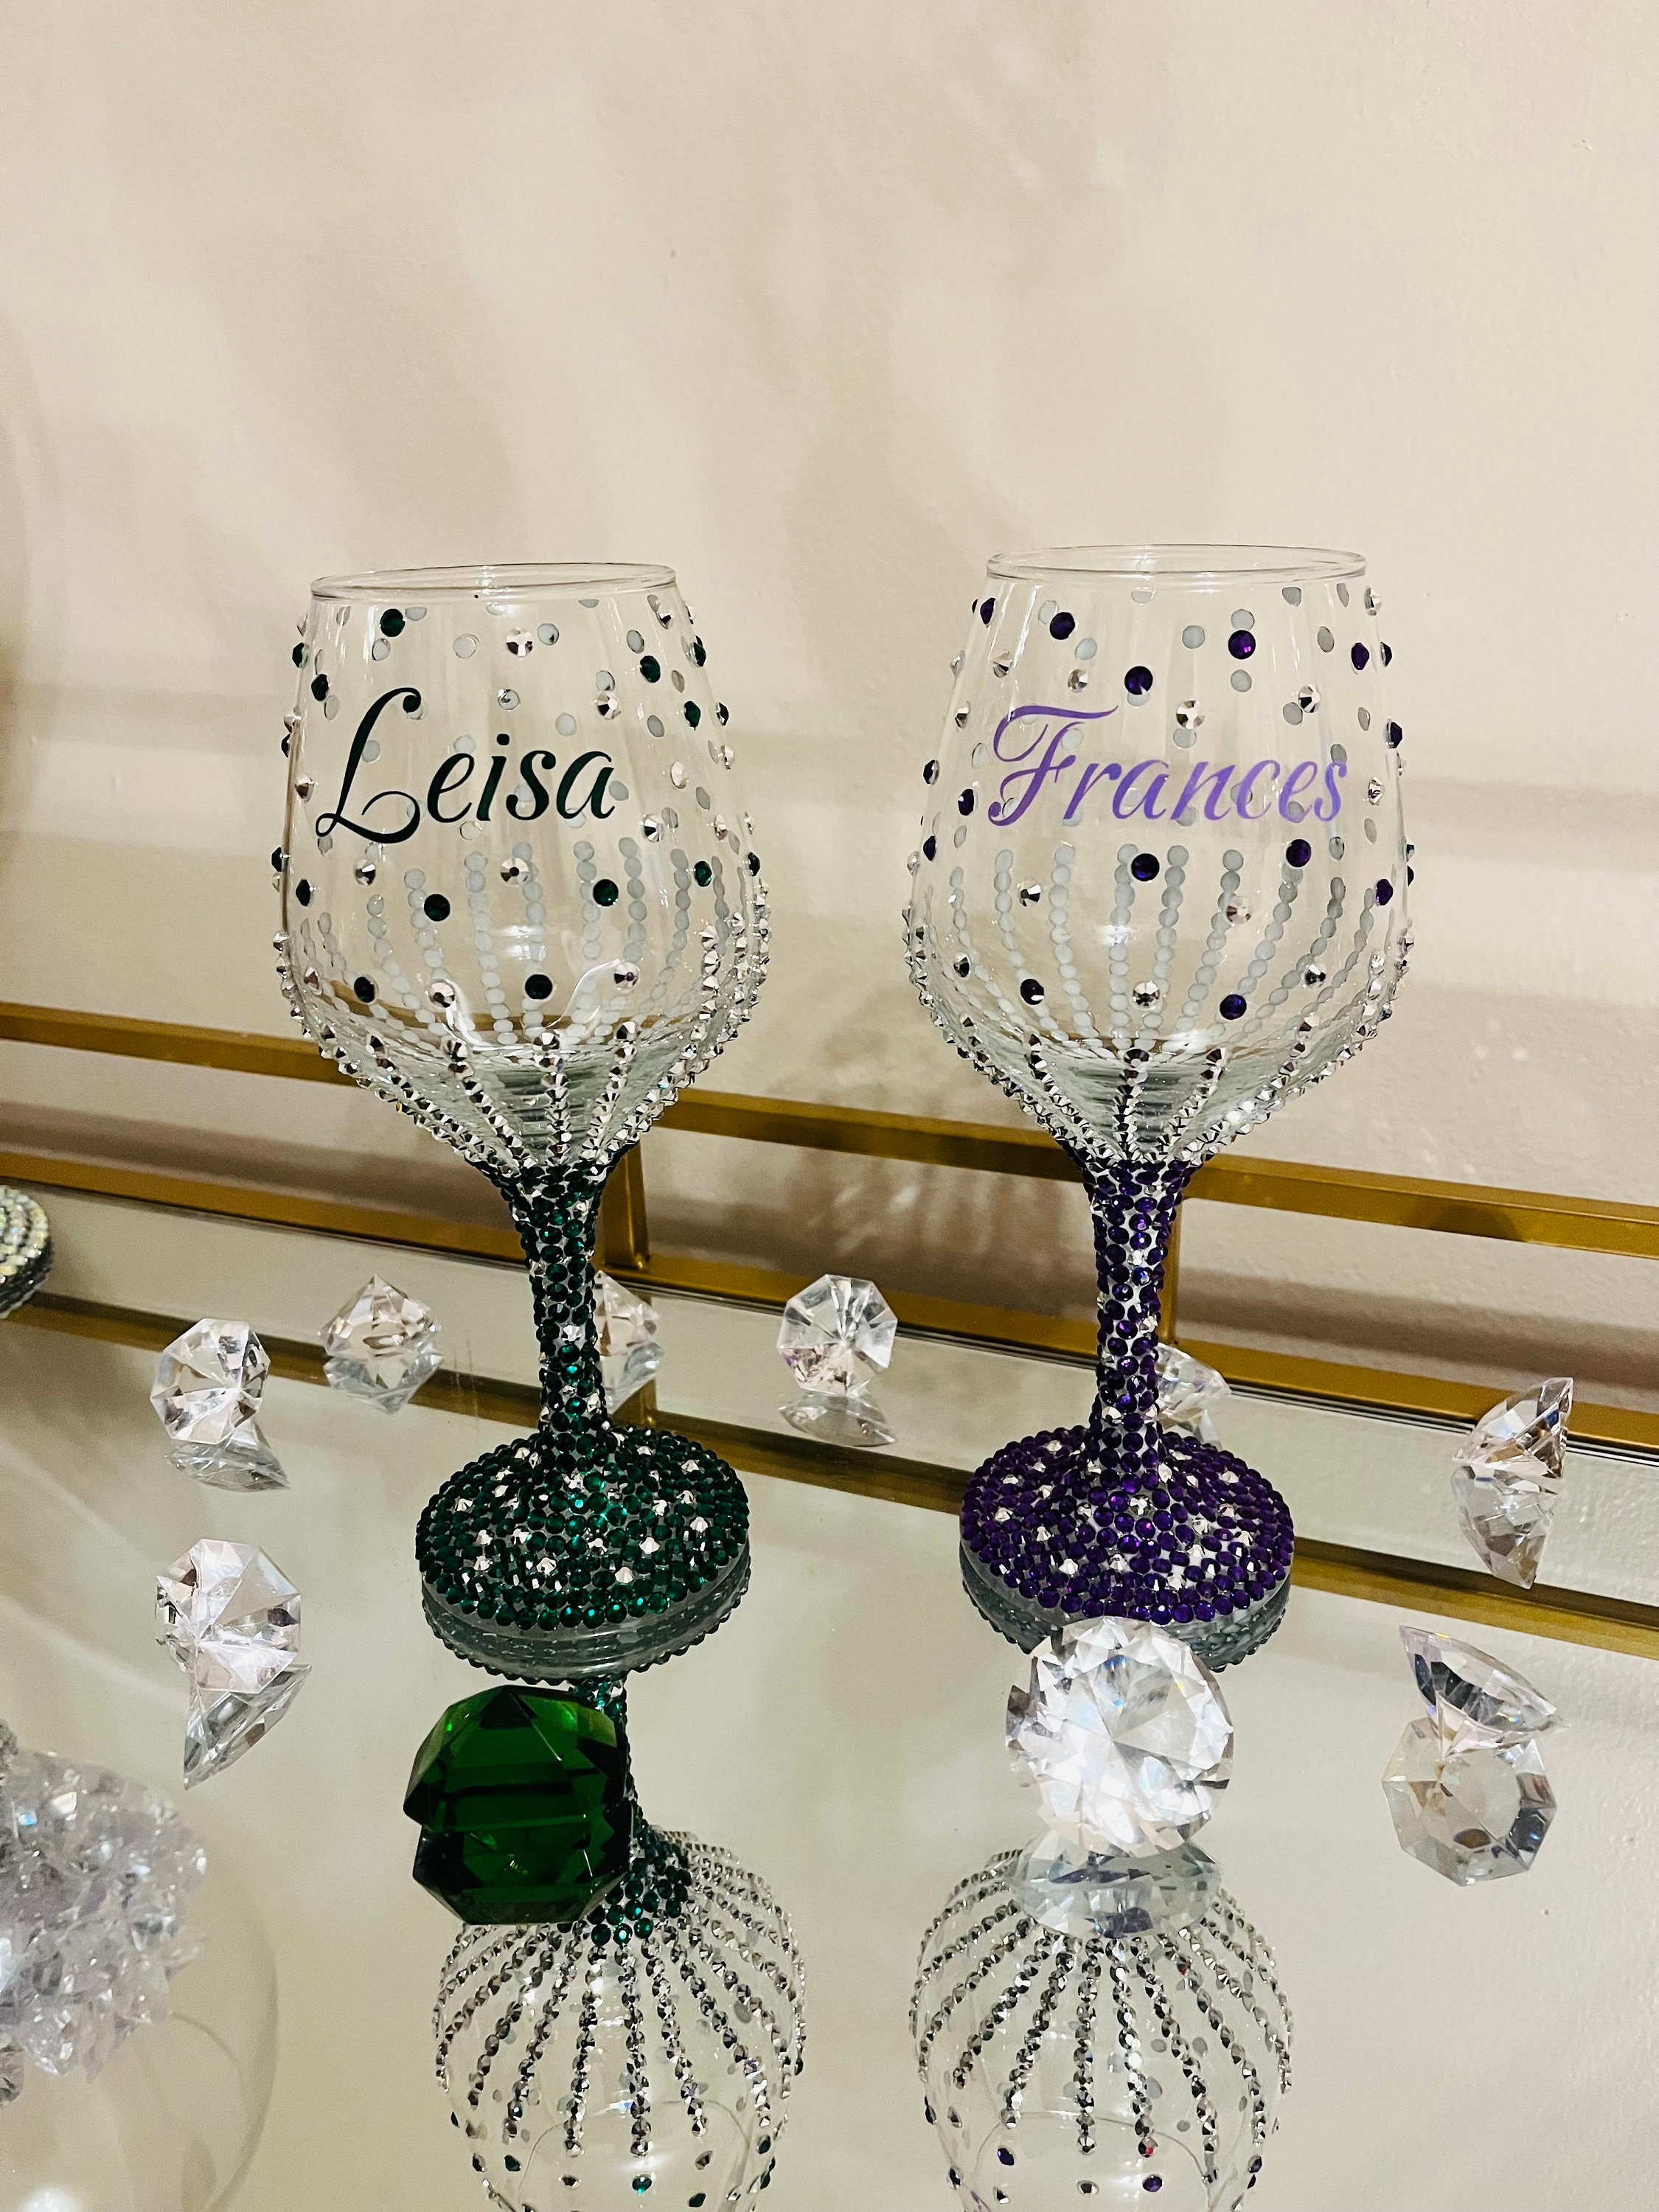 Cute DIY Valentine's Day Gift - Personalized Wine Glasses